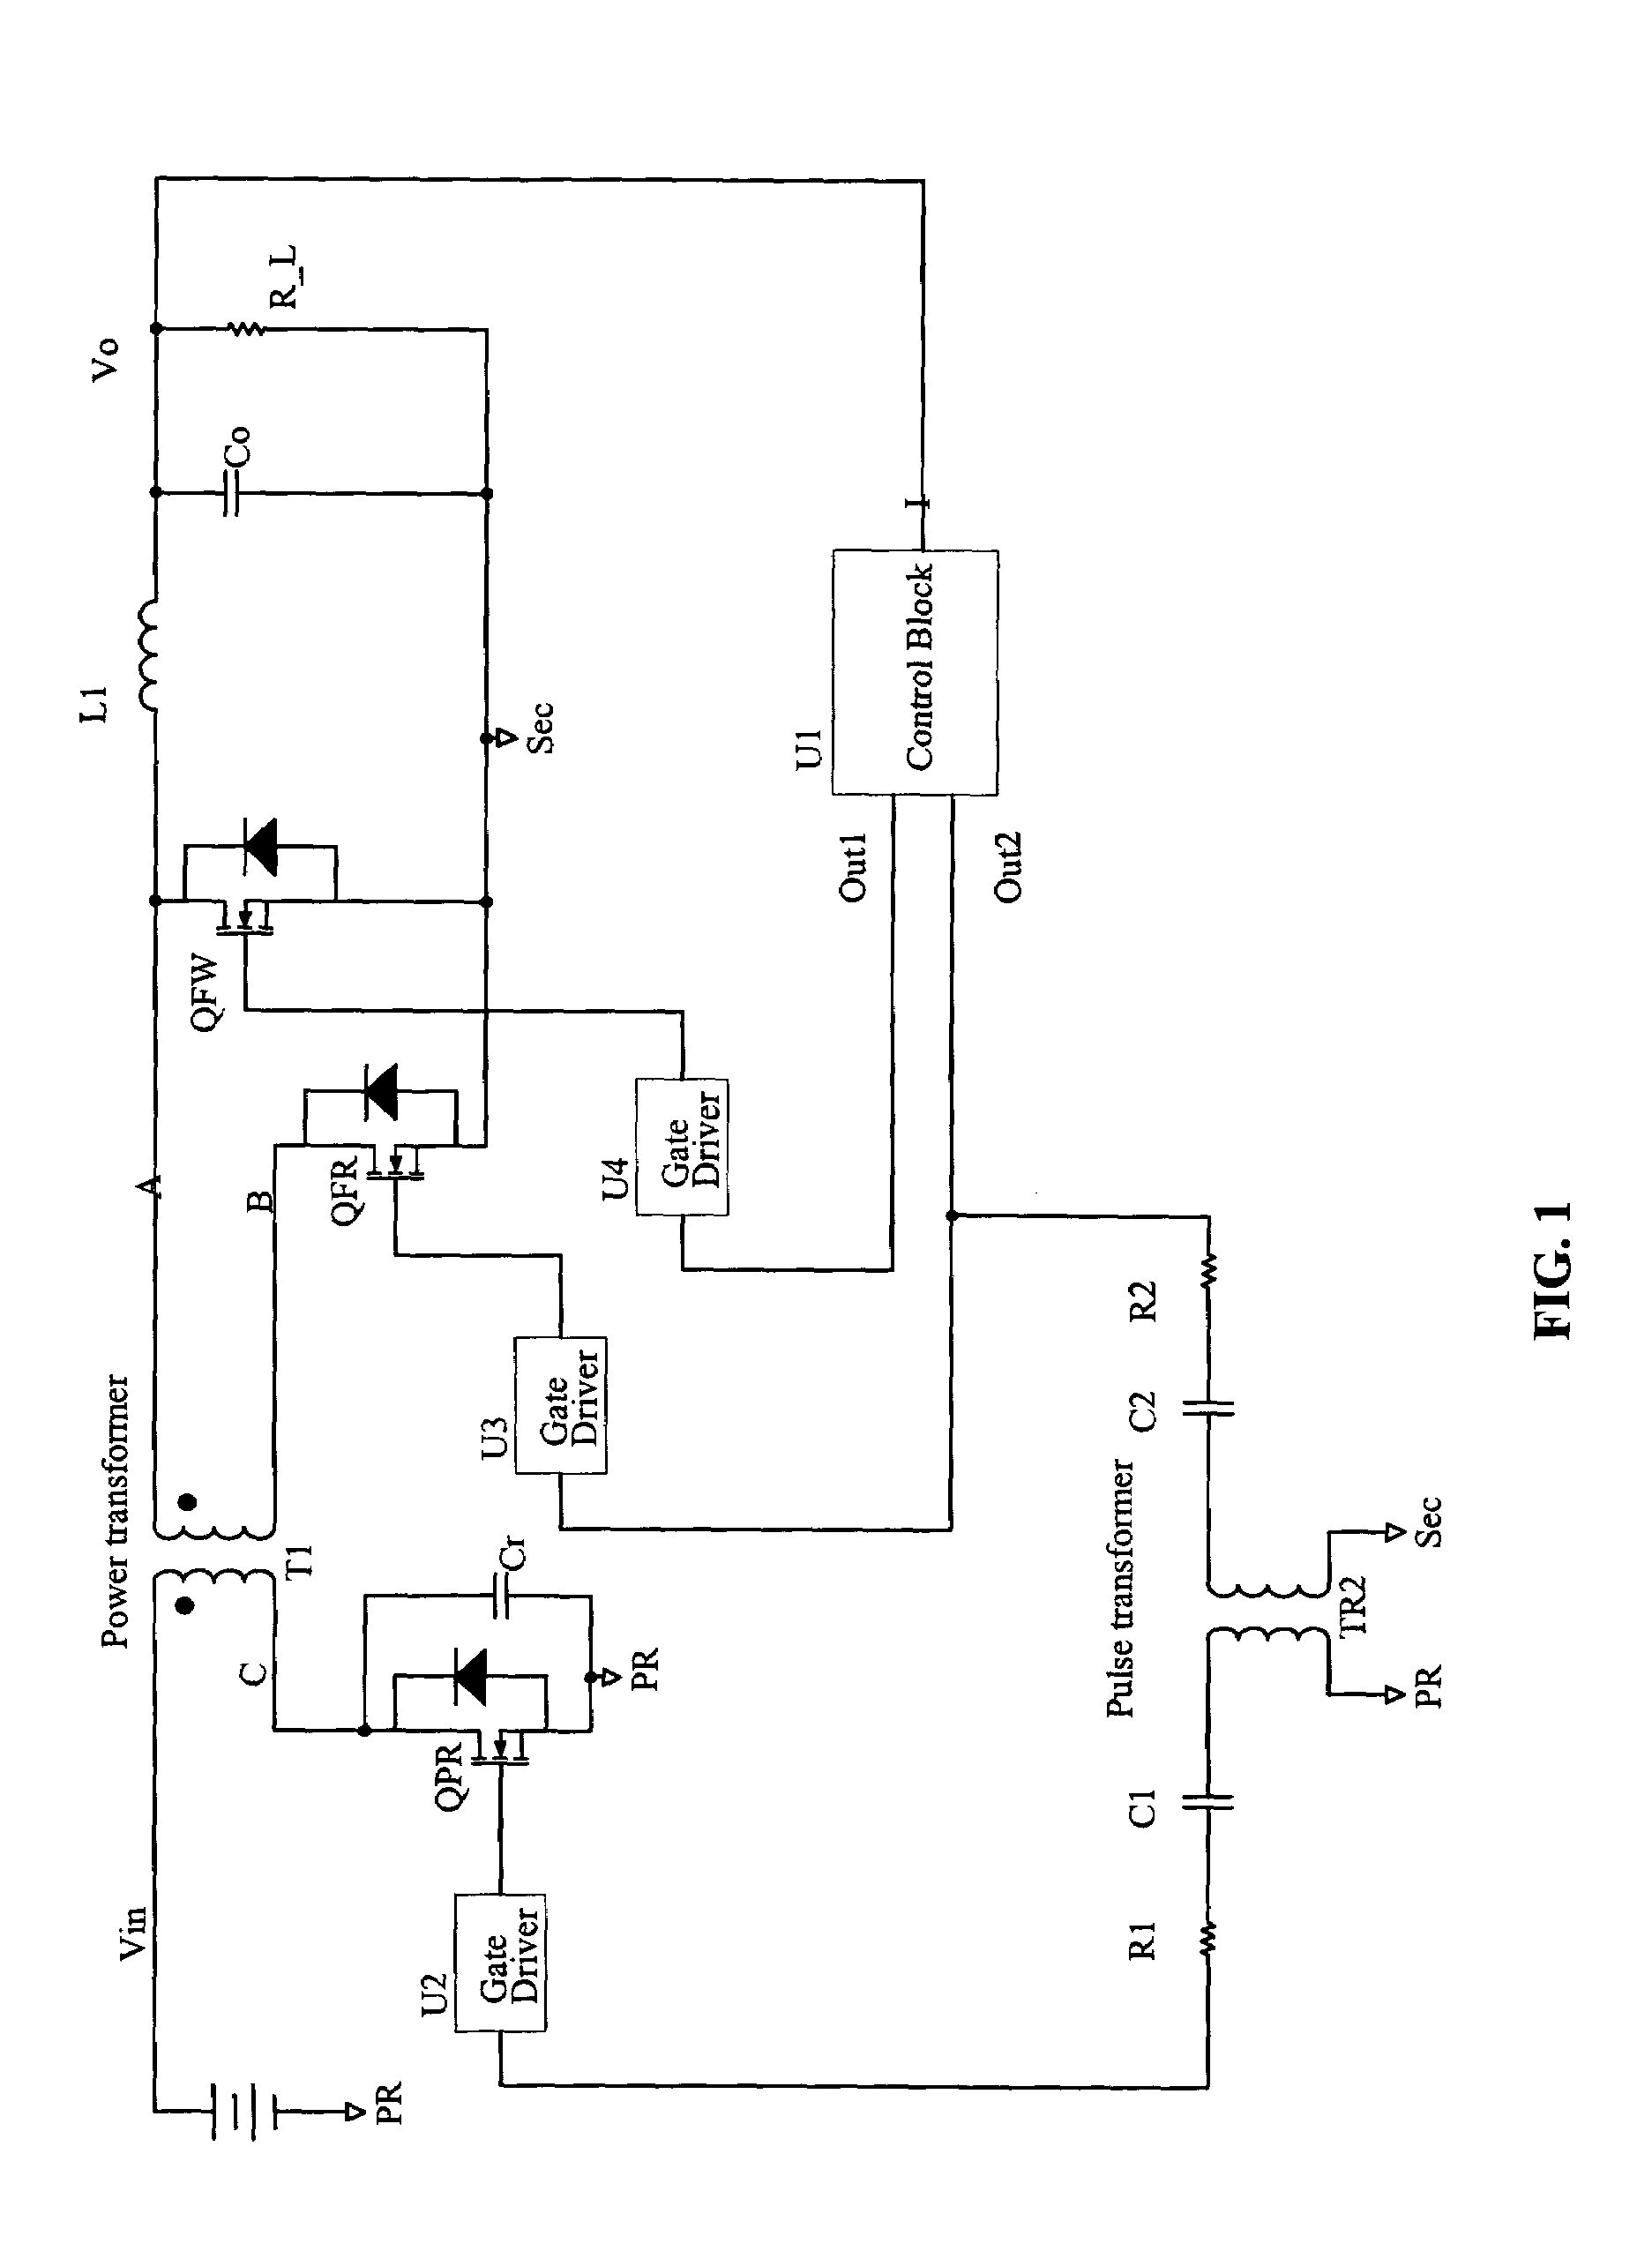 Control circuit with tracking turn on/off delay for a single-ended forward converter with synchronous rectification